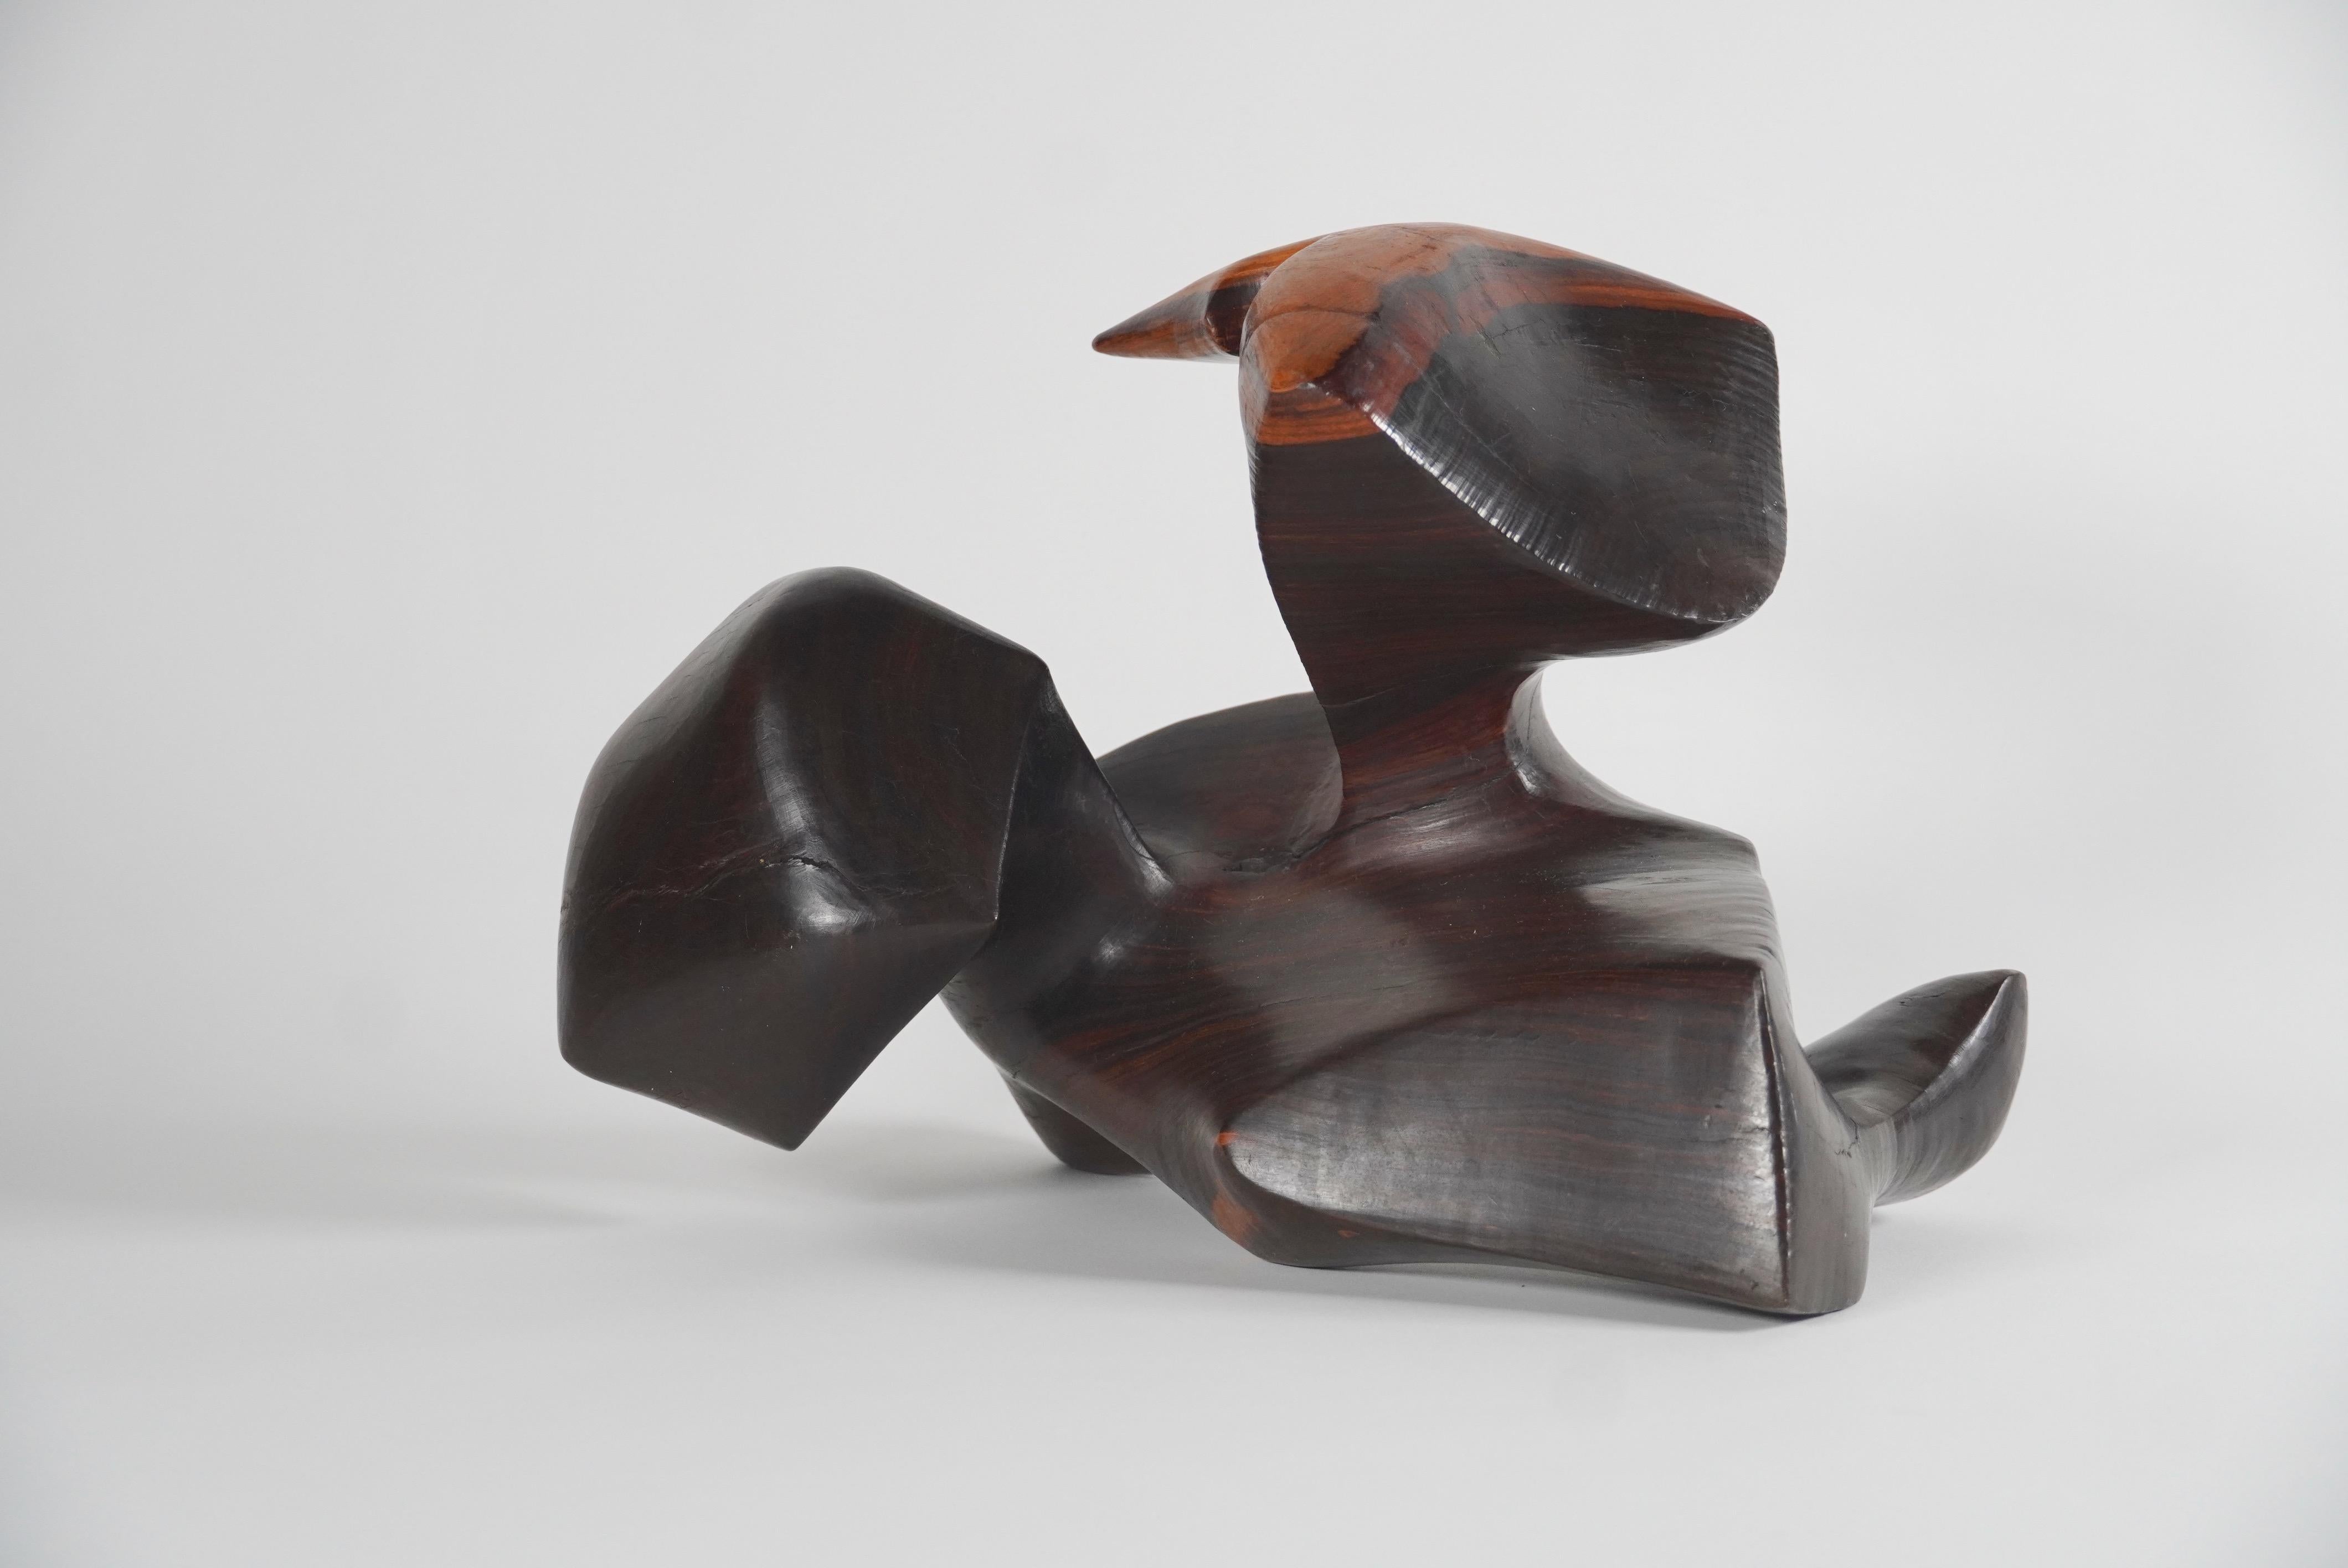 Free form Organic Modern abstract sculpture hand carved out of solid rosewood finely sanded and polished to have a natural luster.